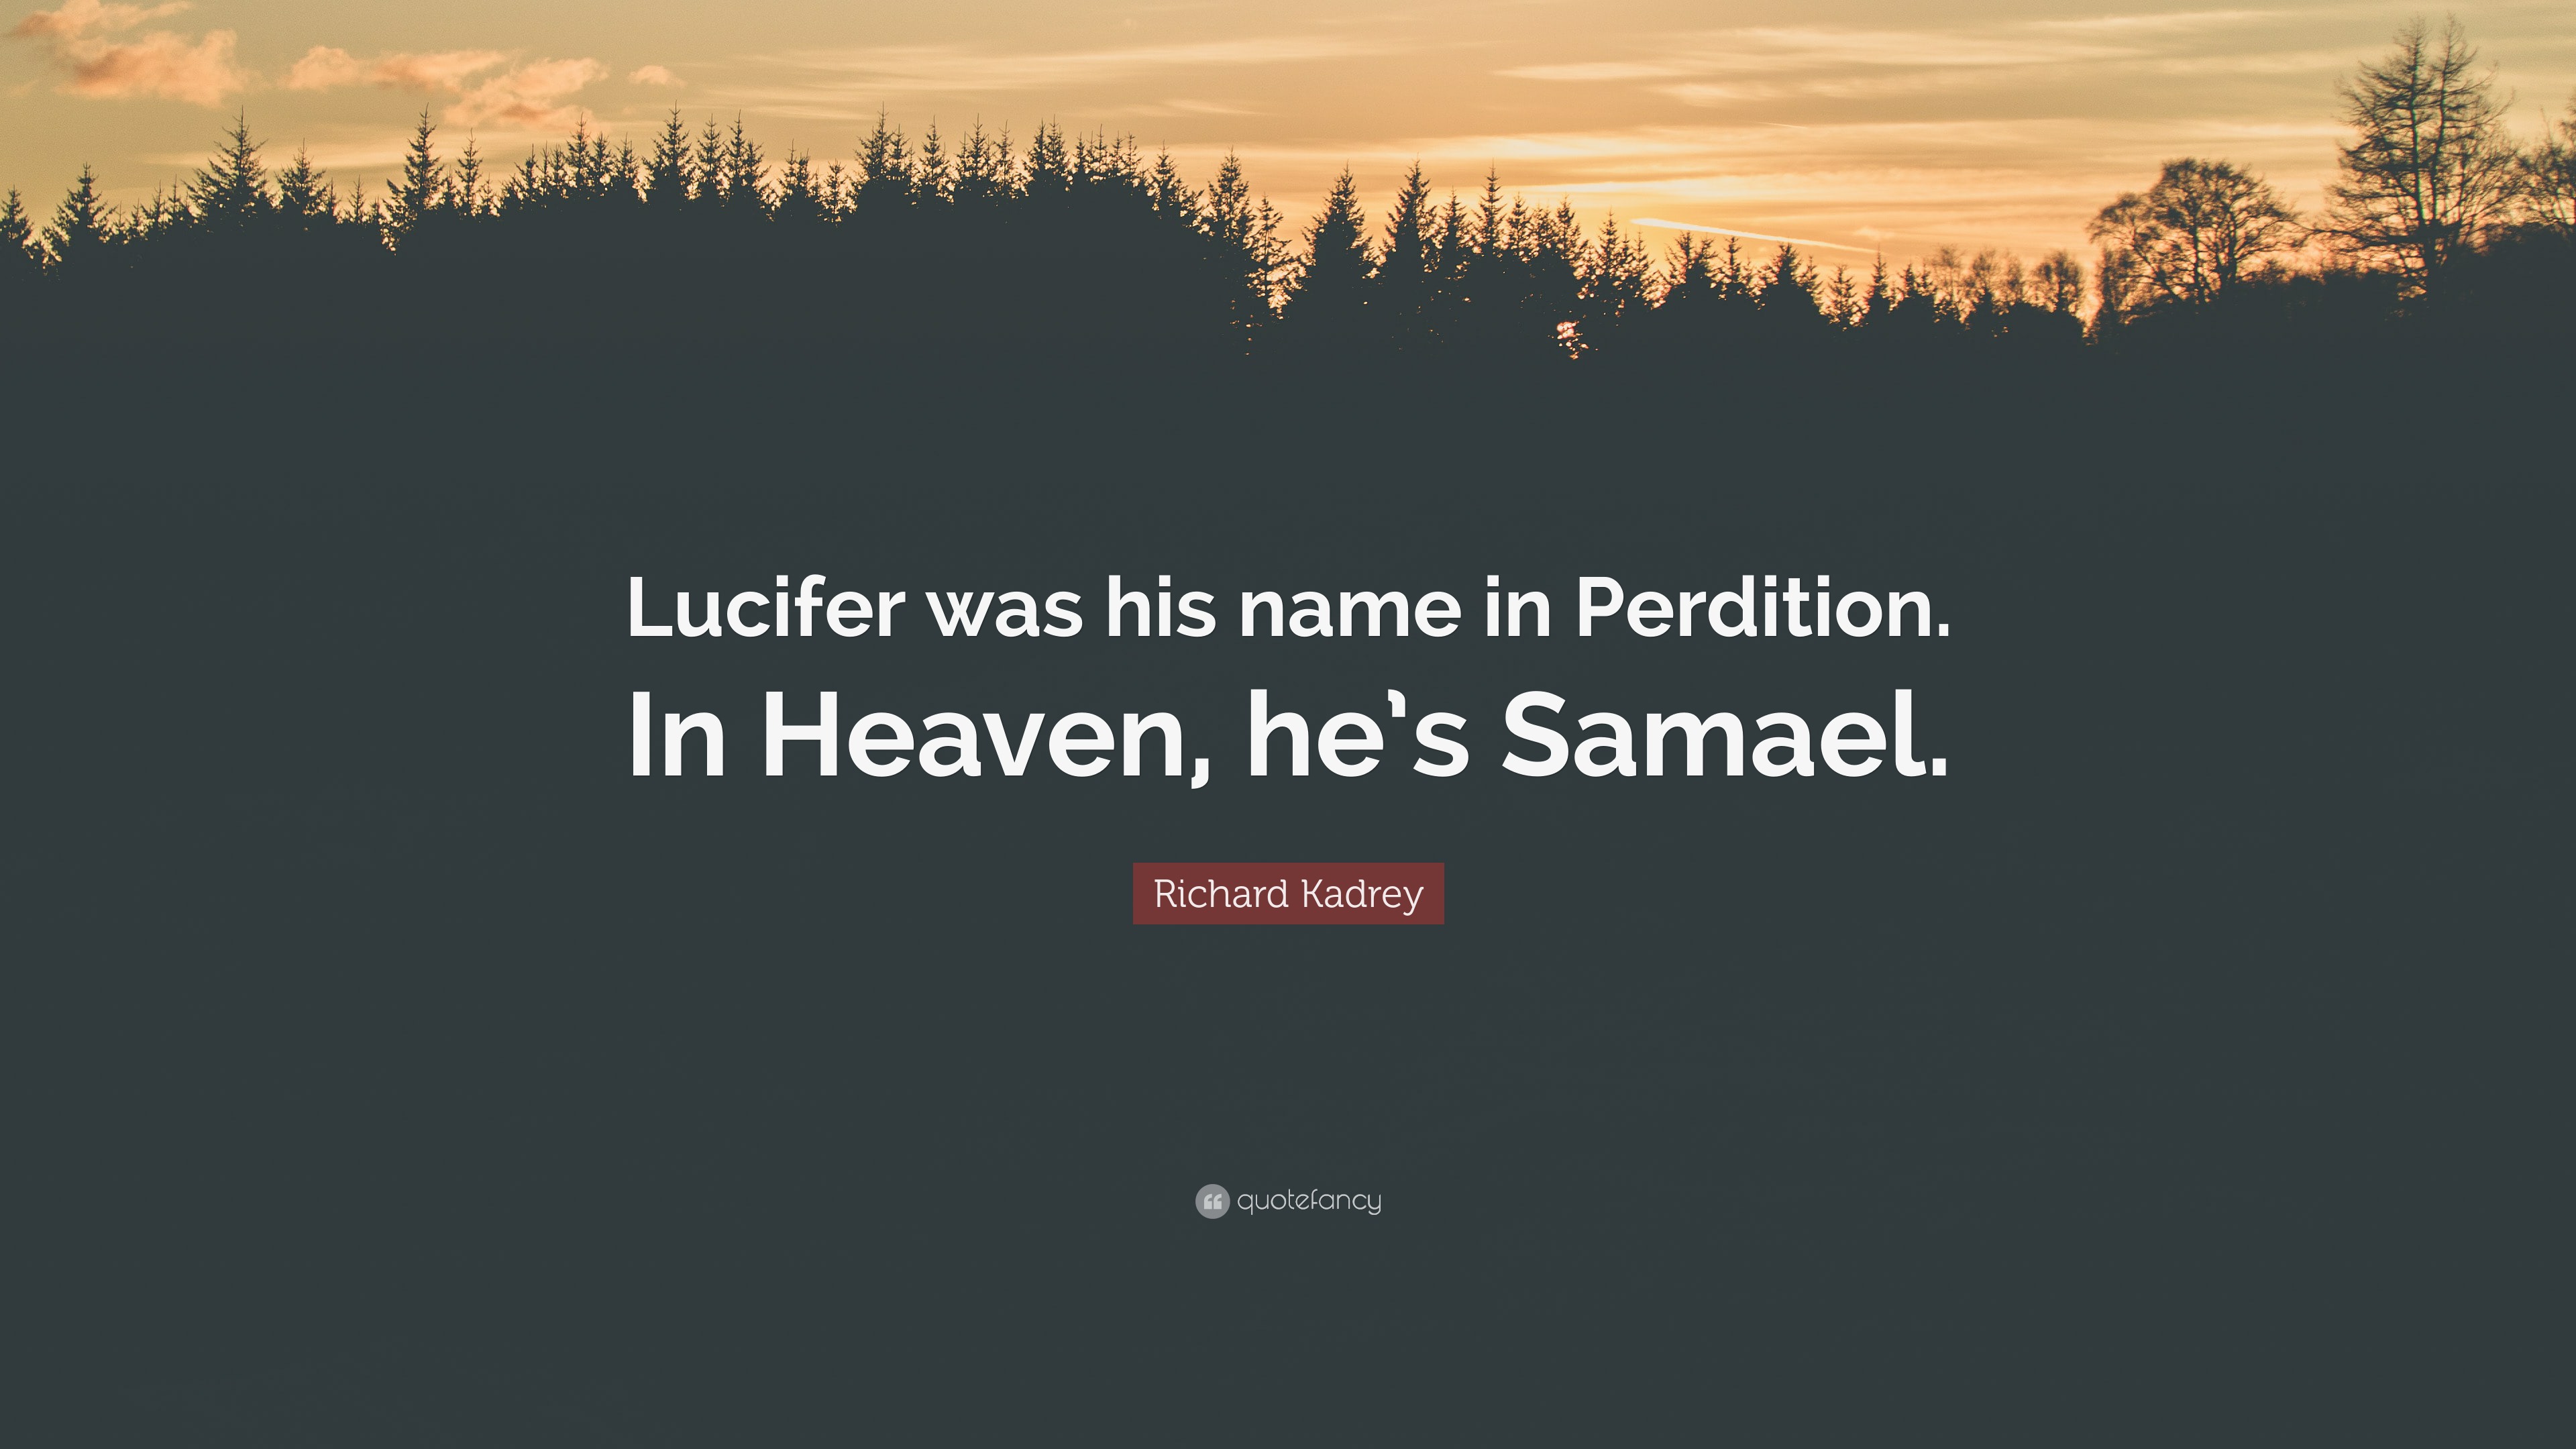 Richard Kadrey Quote: “Lucifer was his name in Perdition. In Heaven, he's  Samael.”